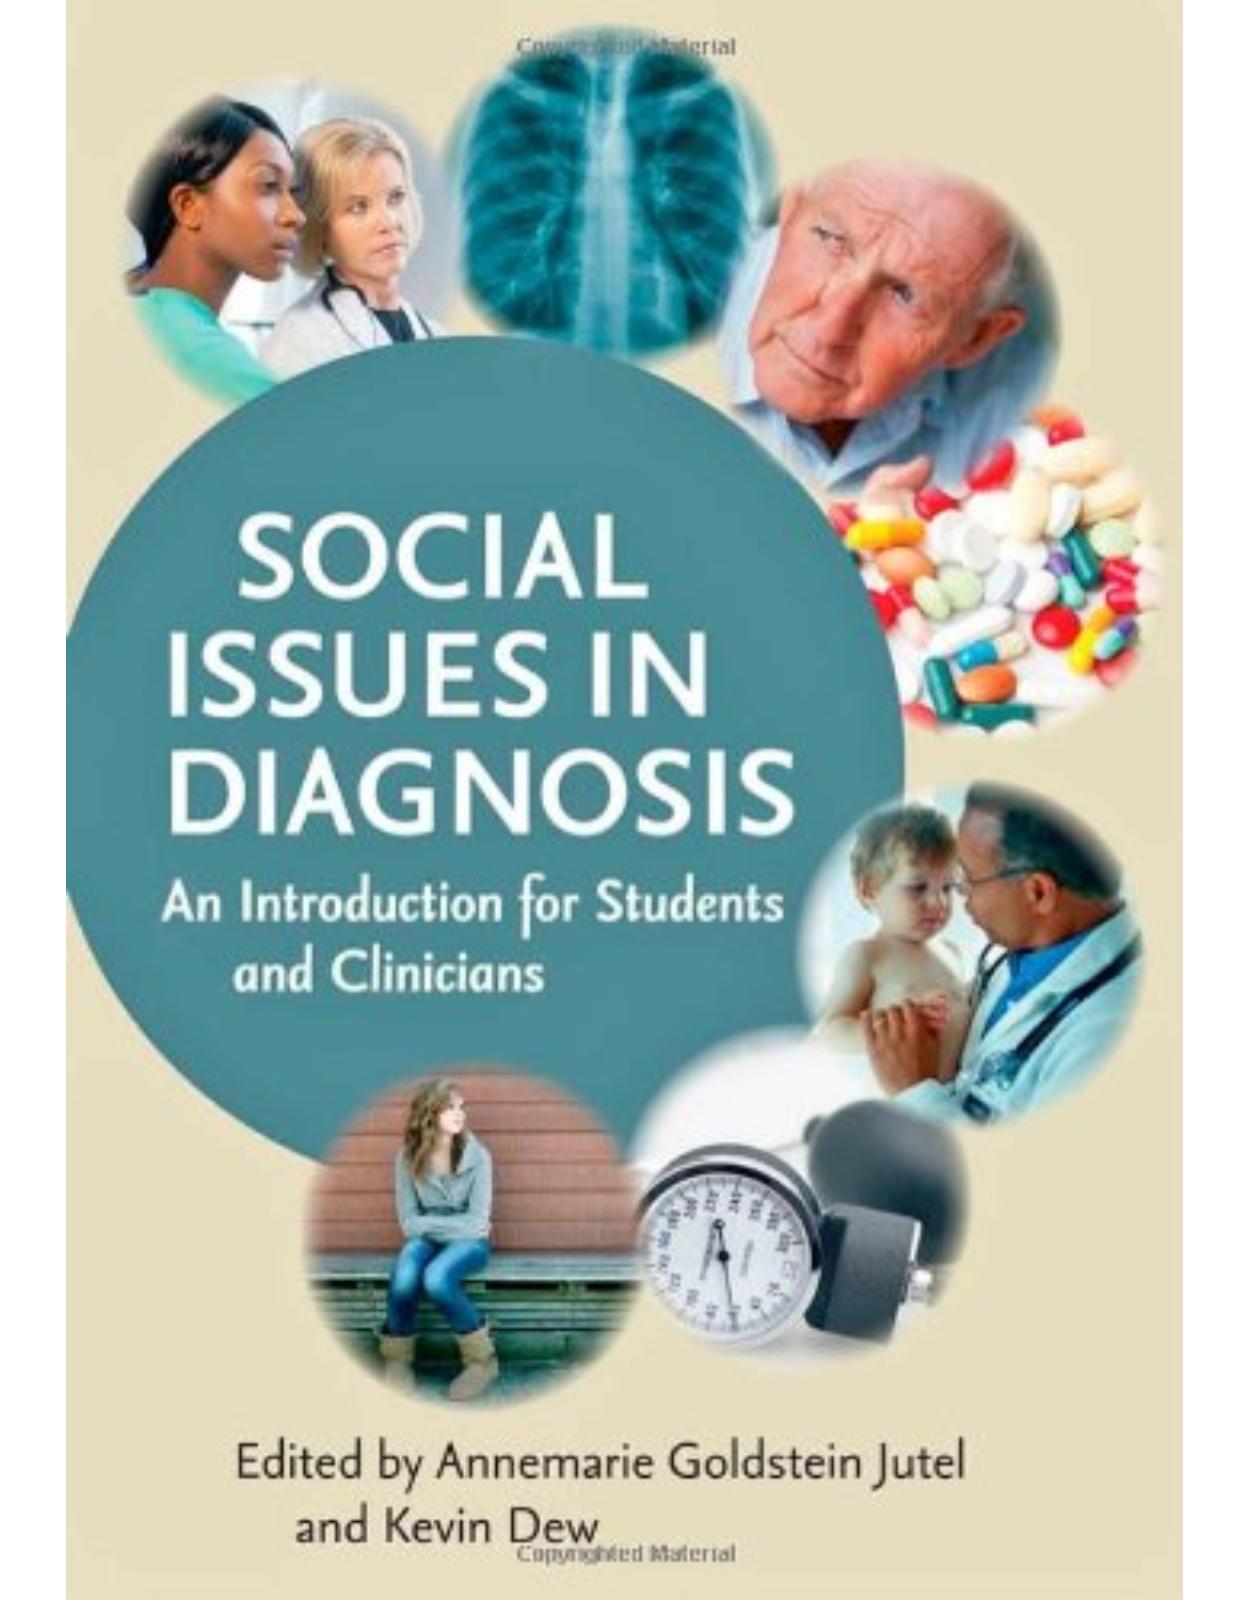 Social Issues in Diagnosis, An Introduction for Students and Clinicians